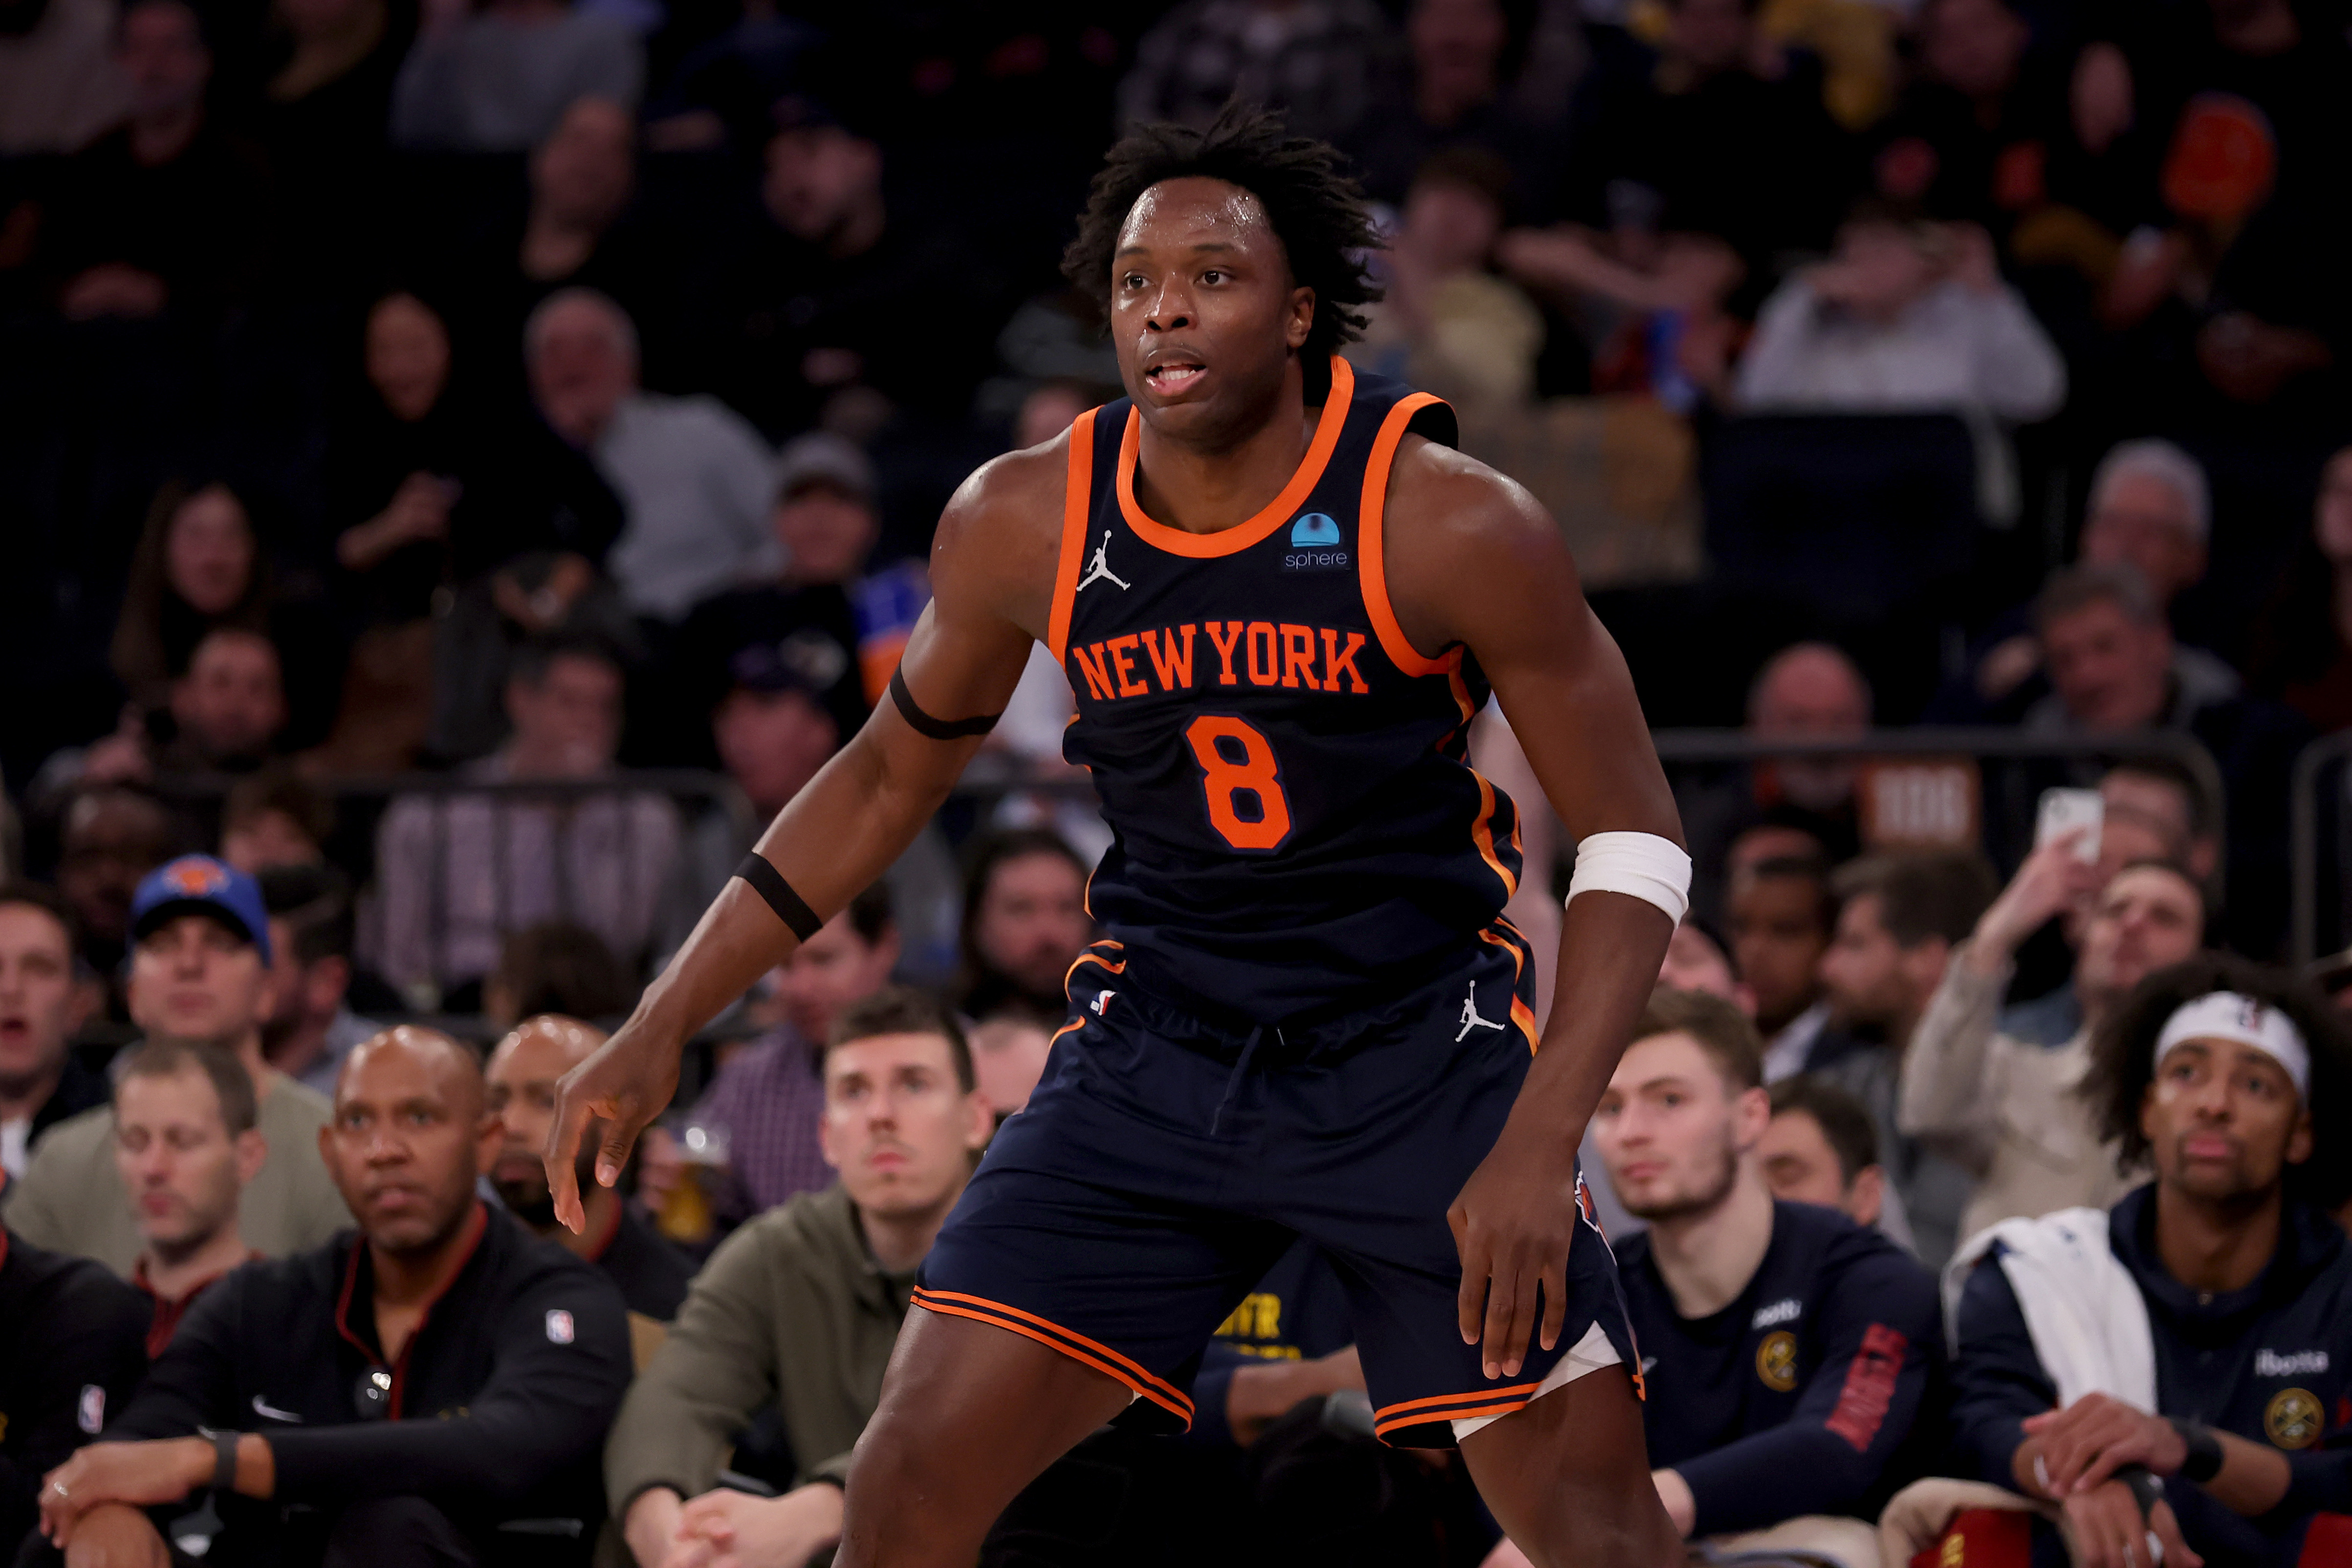 Surging Knicks rout Nuggets for 5th straight win